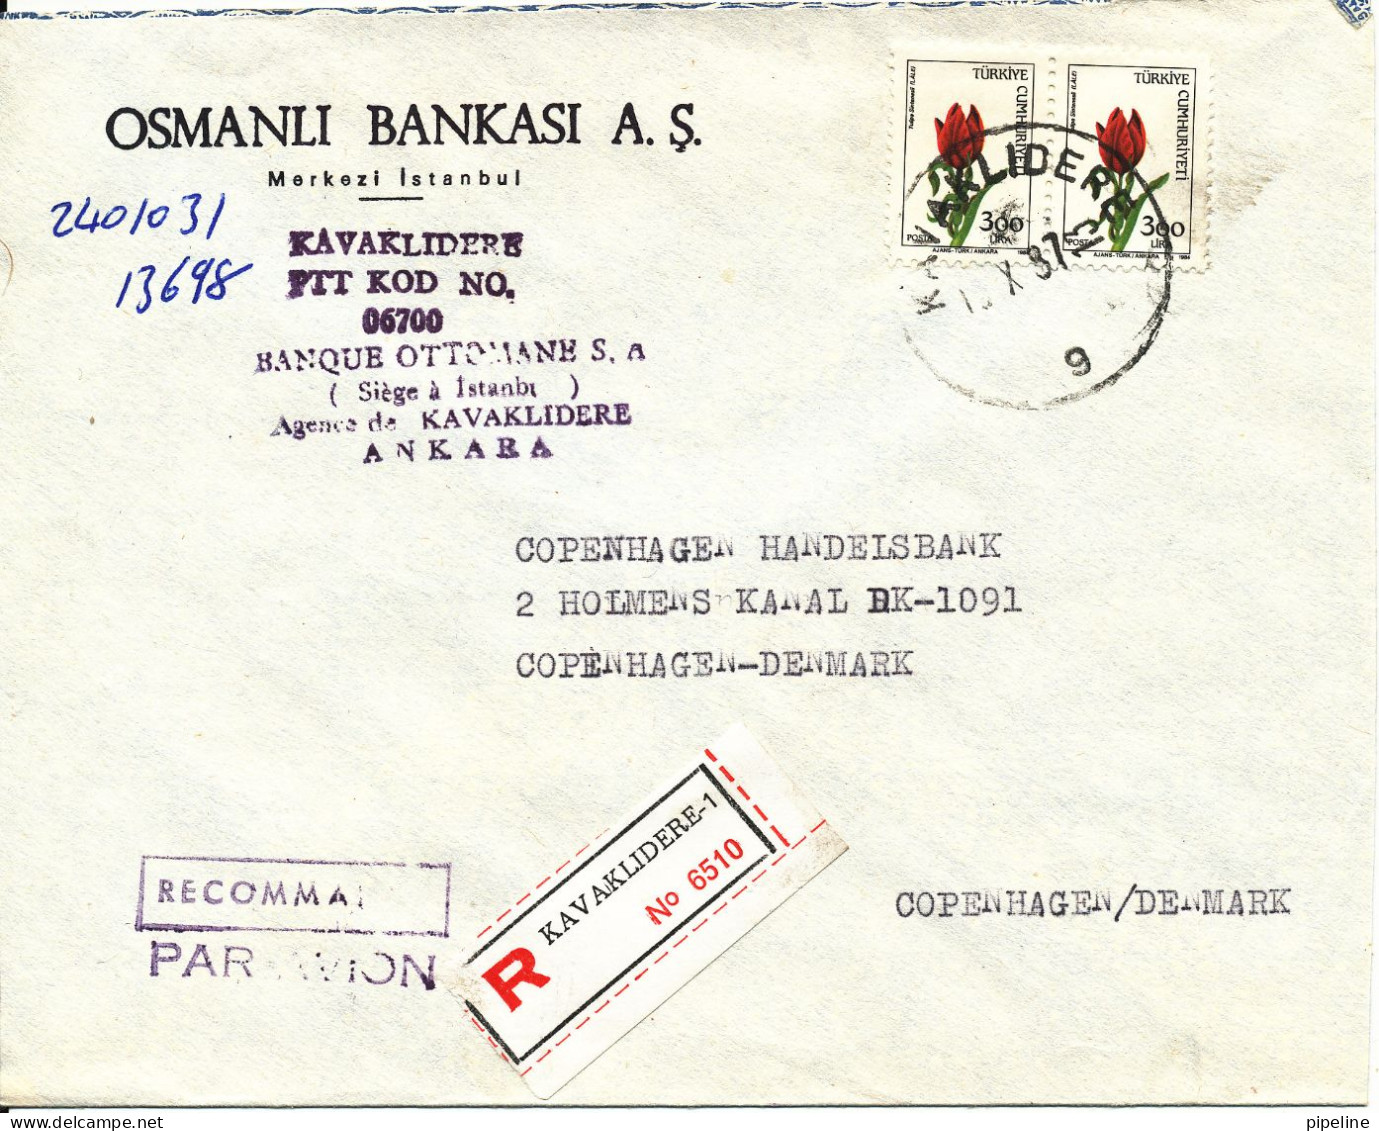 Turkey Registered Bank Cover Sent Air Mail To Denmark 1987 (Osmanli Bankasi A. S.) - Covers & Documents